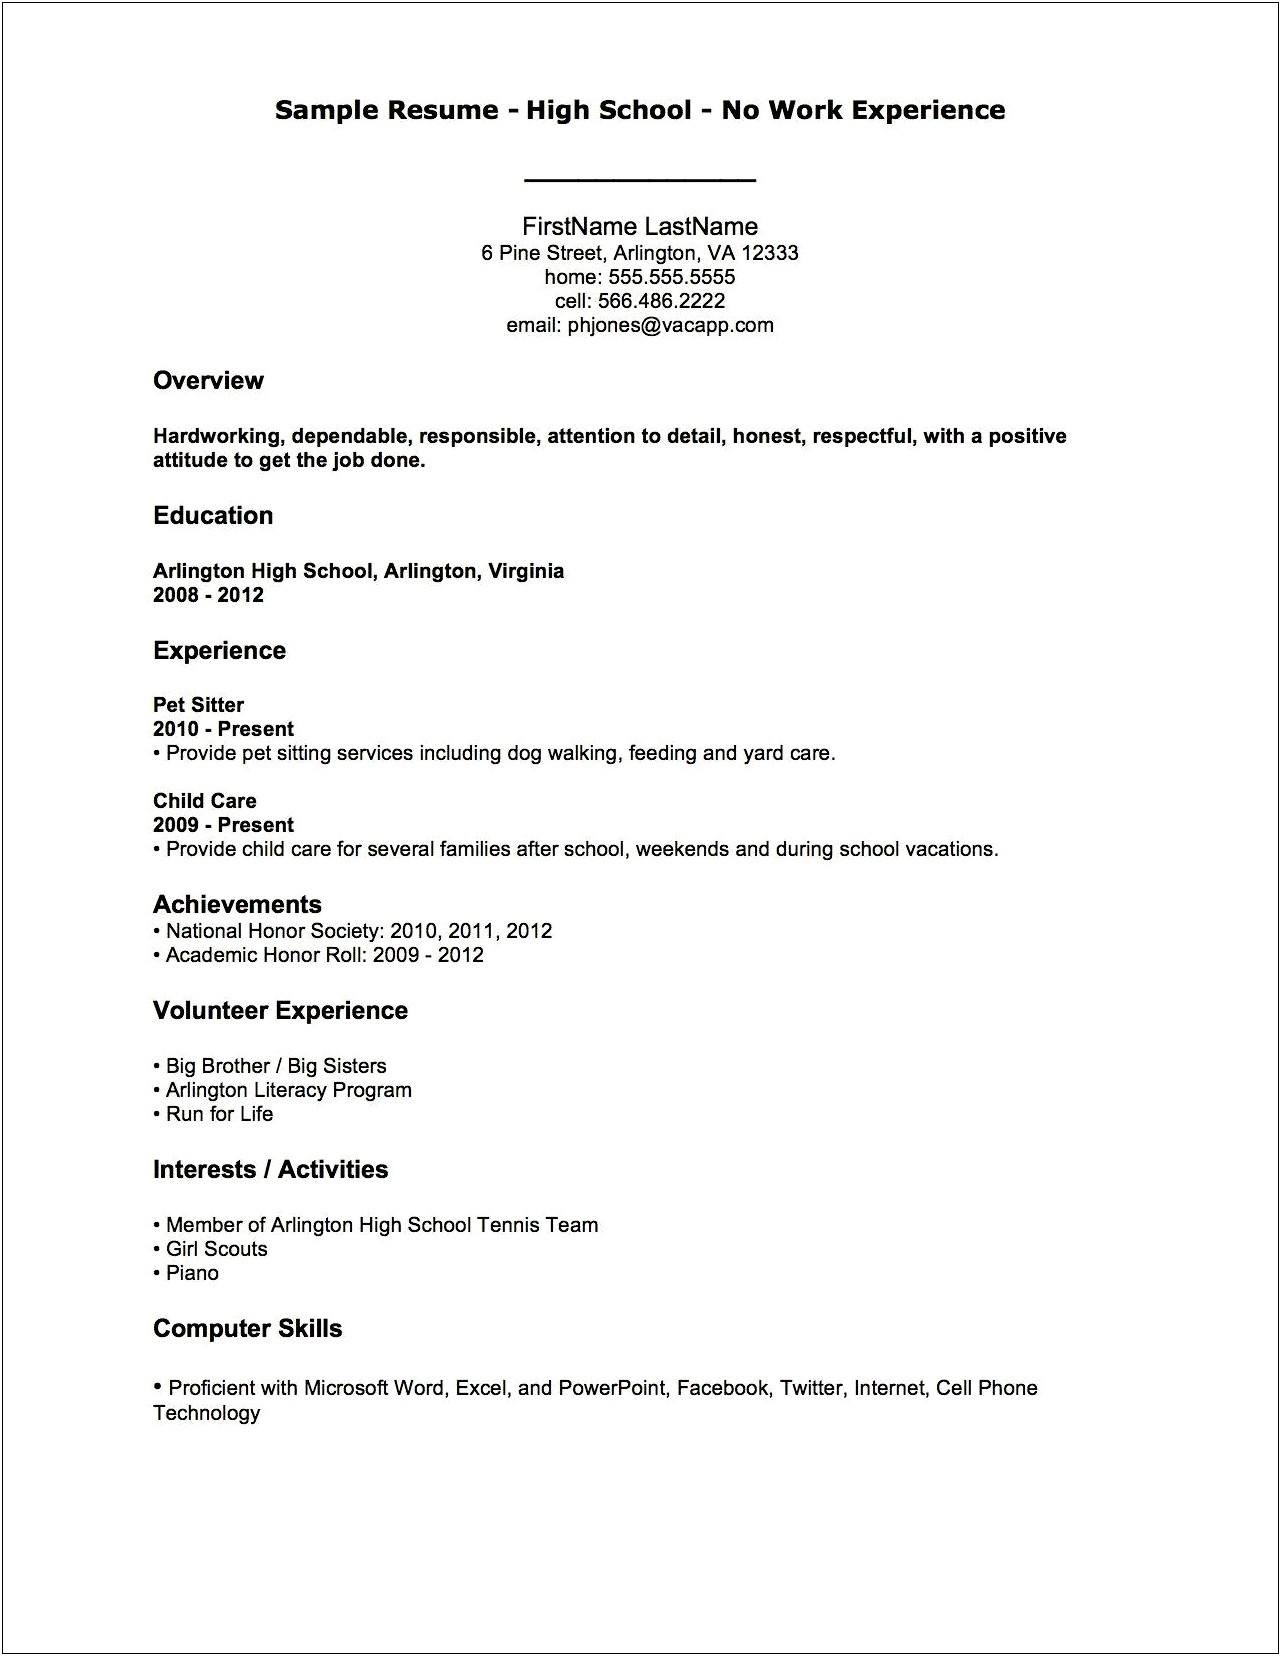 Creating A Resume Without Job Experience